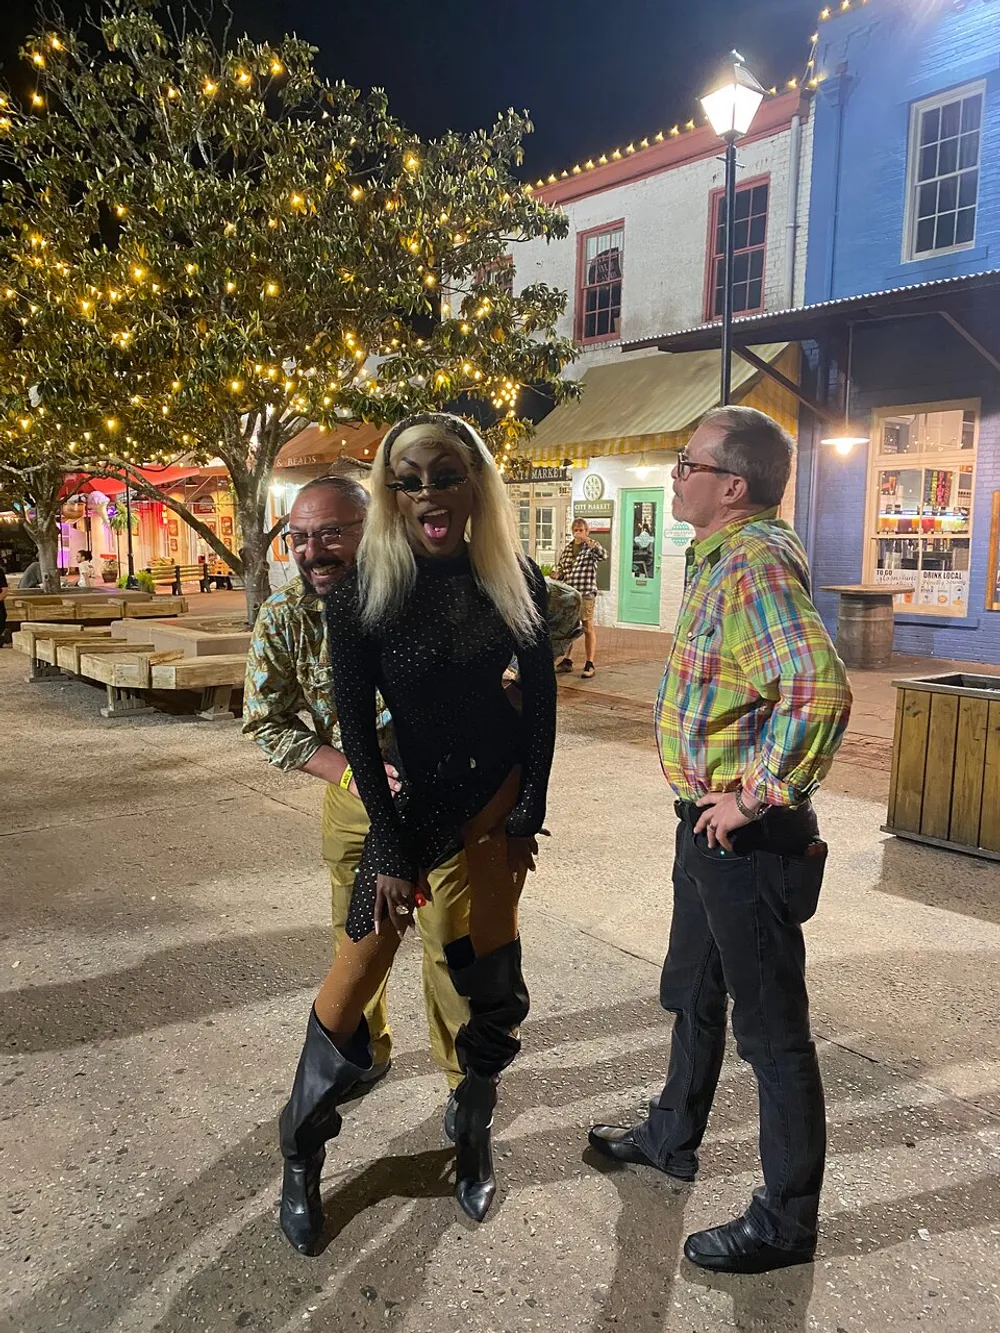 Three people are sharing a joyful moment on a lively street at night with one person playfully sticking out their tongue adding a hint of whimsy to the scene